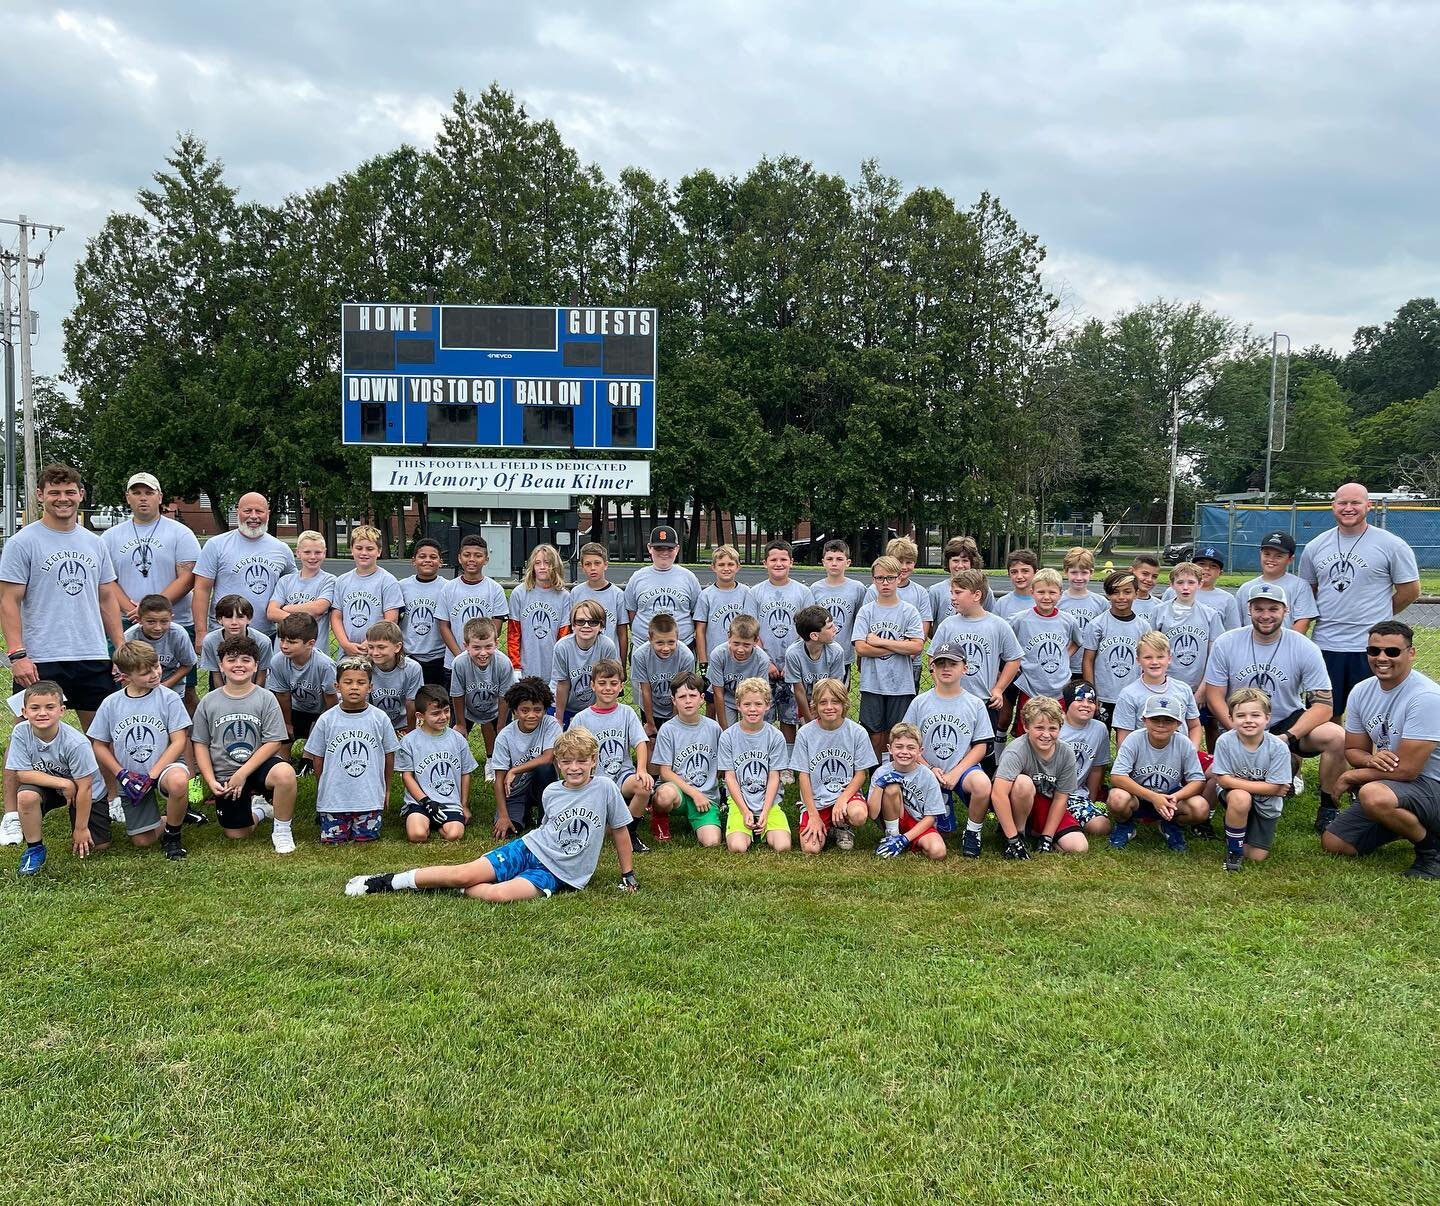 Just finished up a great week of camp with 3rd-5th graders! We at Legendary Sports Training would like to thank all the families that chose to train with us! #legendarysportstraining #youthfootball #youthfootballtraining #saratogasprings #saratogaspr